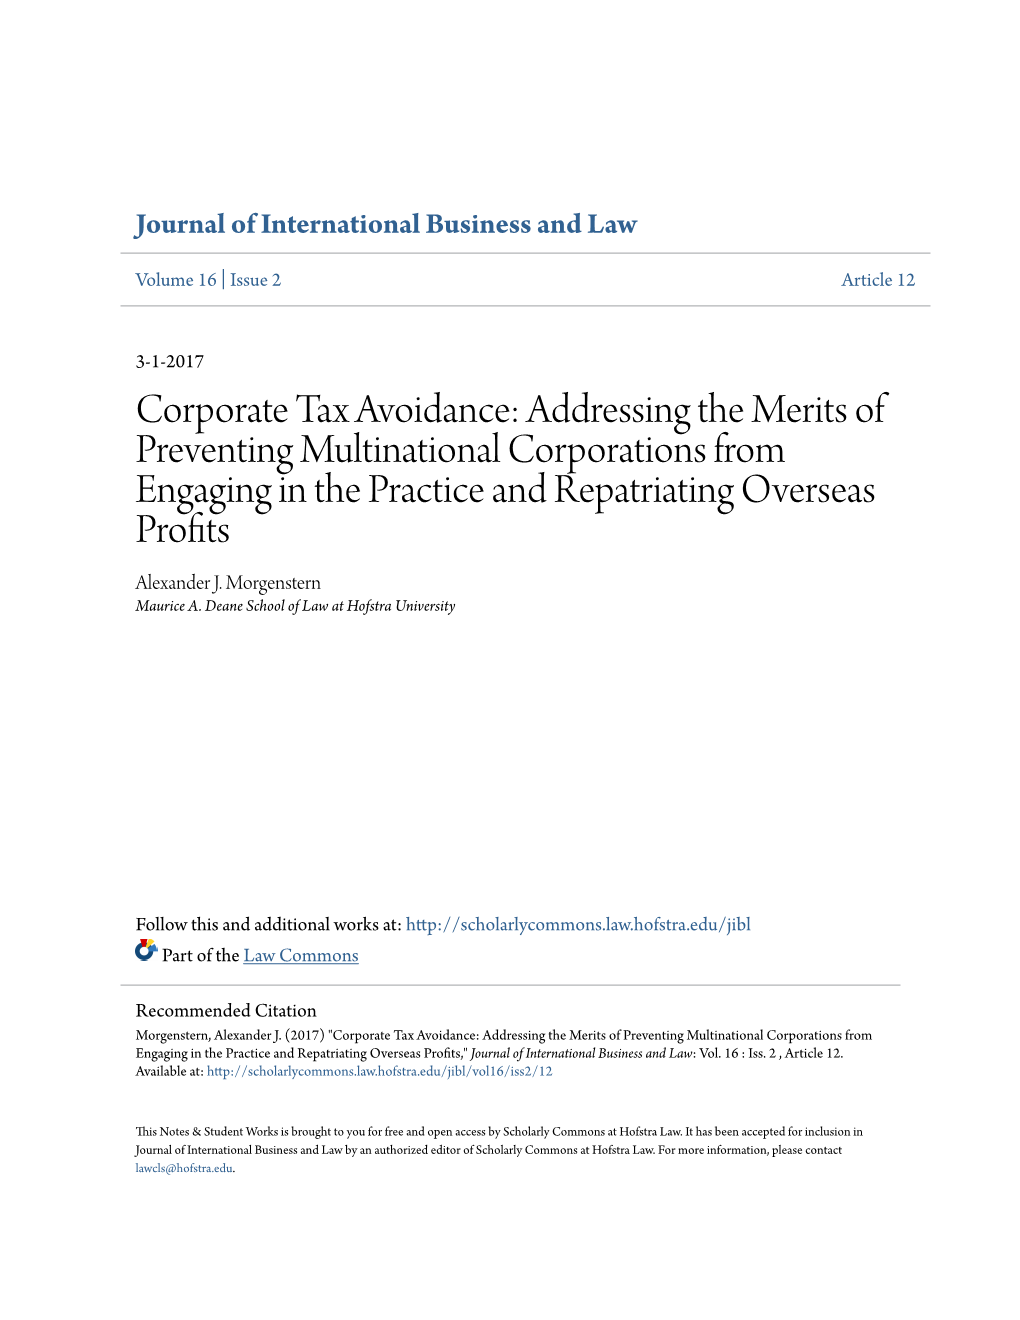 Corporate Tax Avoidance: Addressing the Merits of Preventing Multinational Corporations from Engaging in the Practice and Repatriating Overseas Profits Alexander J